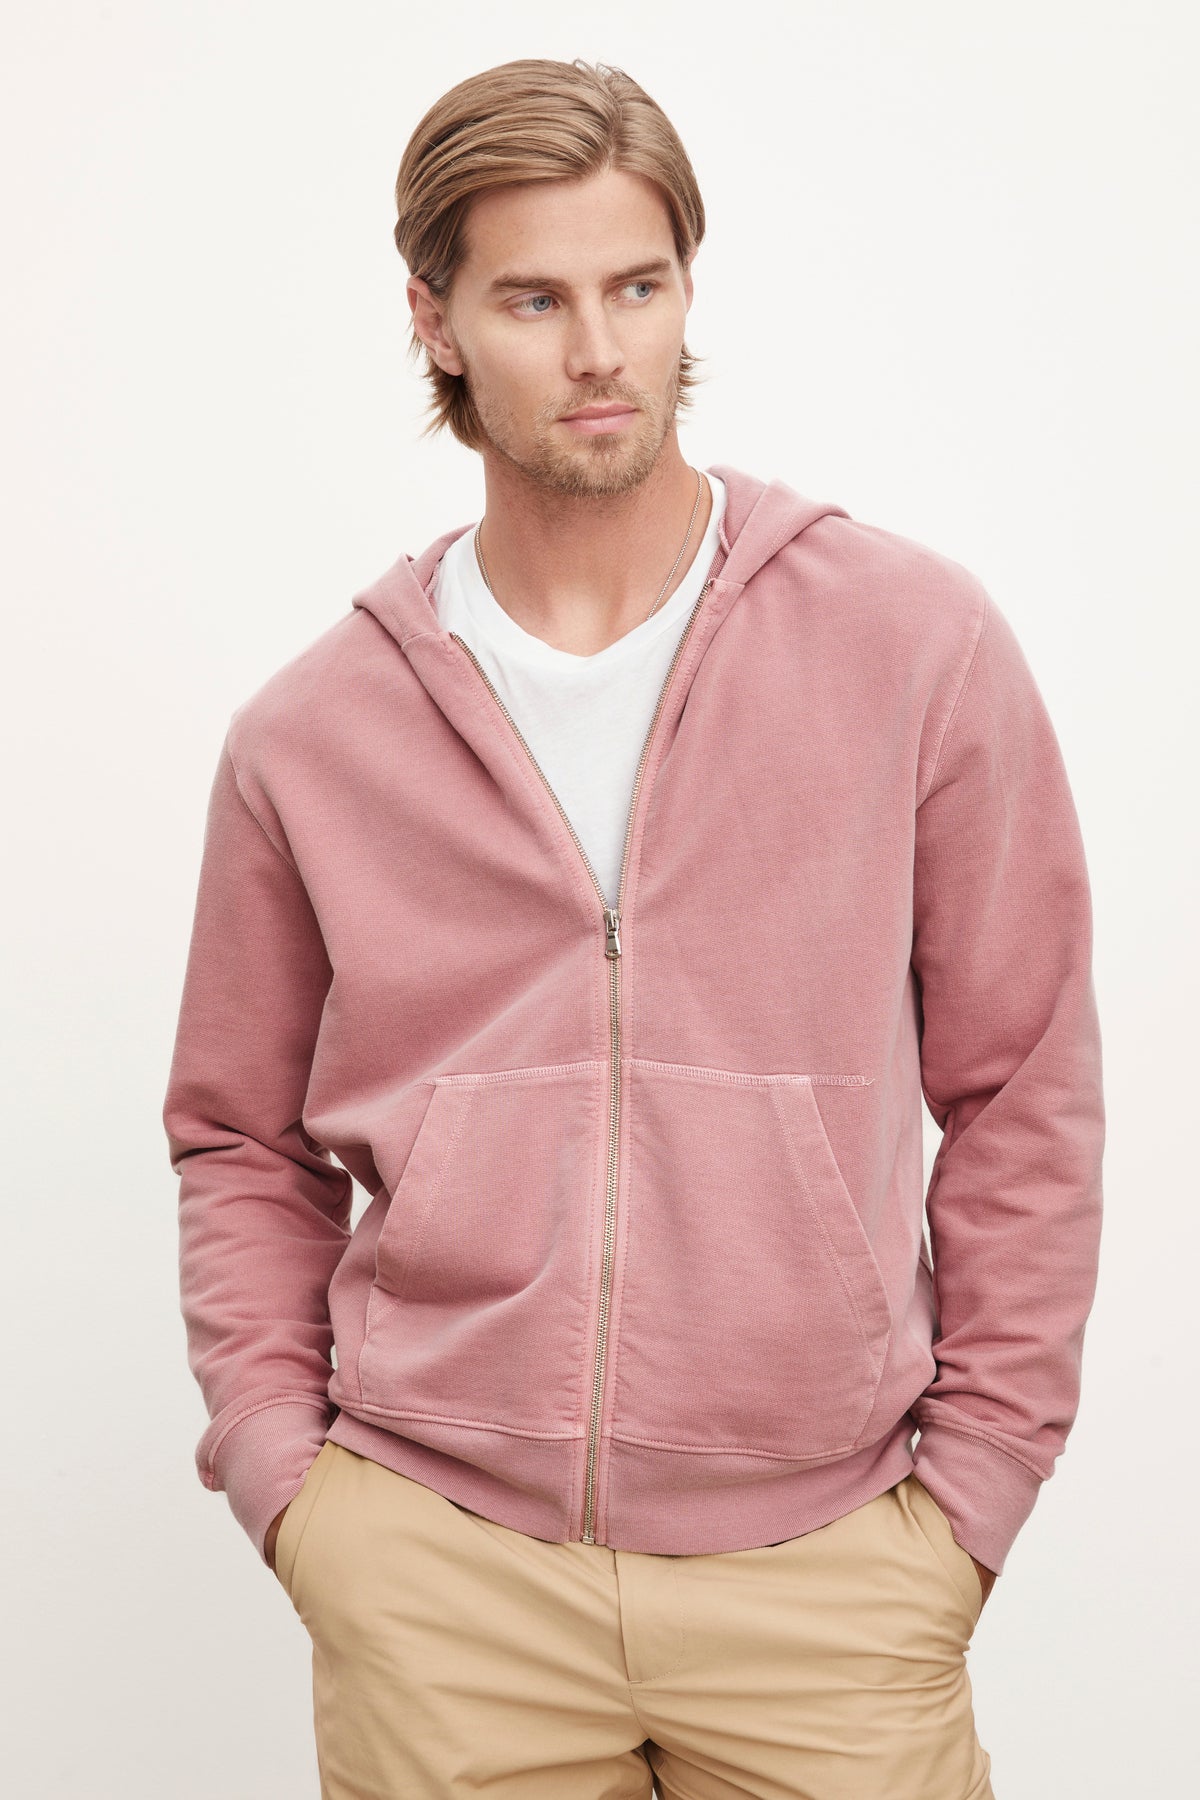 A man wearing a Velvet by Graham & Spencer VINCENT HOODIE in pink over a white t-shirt, paired with beige pants, posing against a plain background.-36732532523201